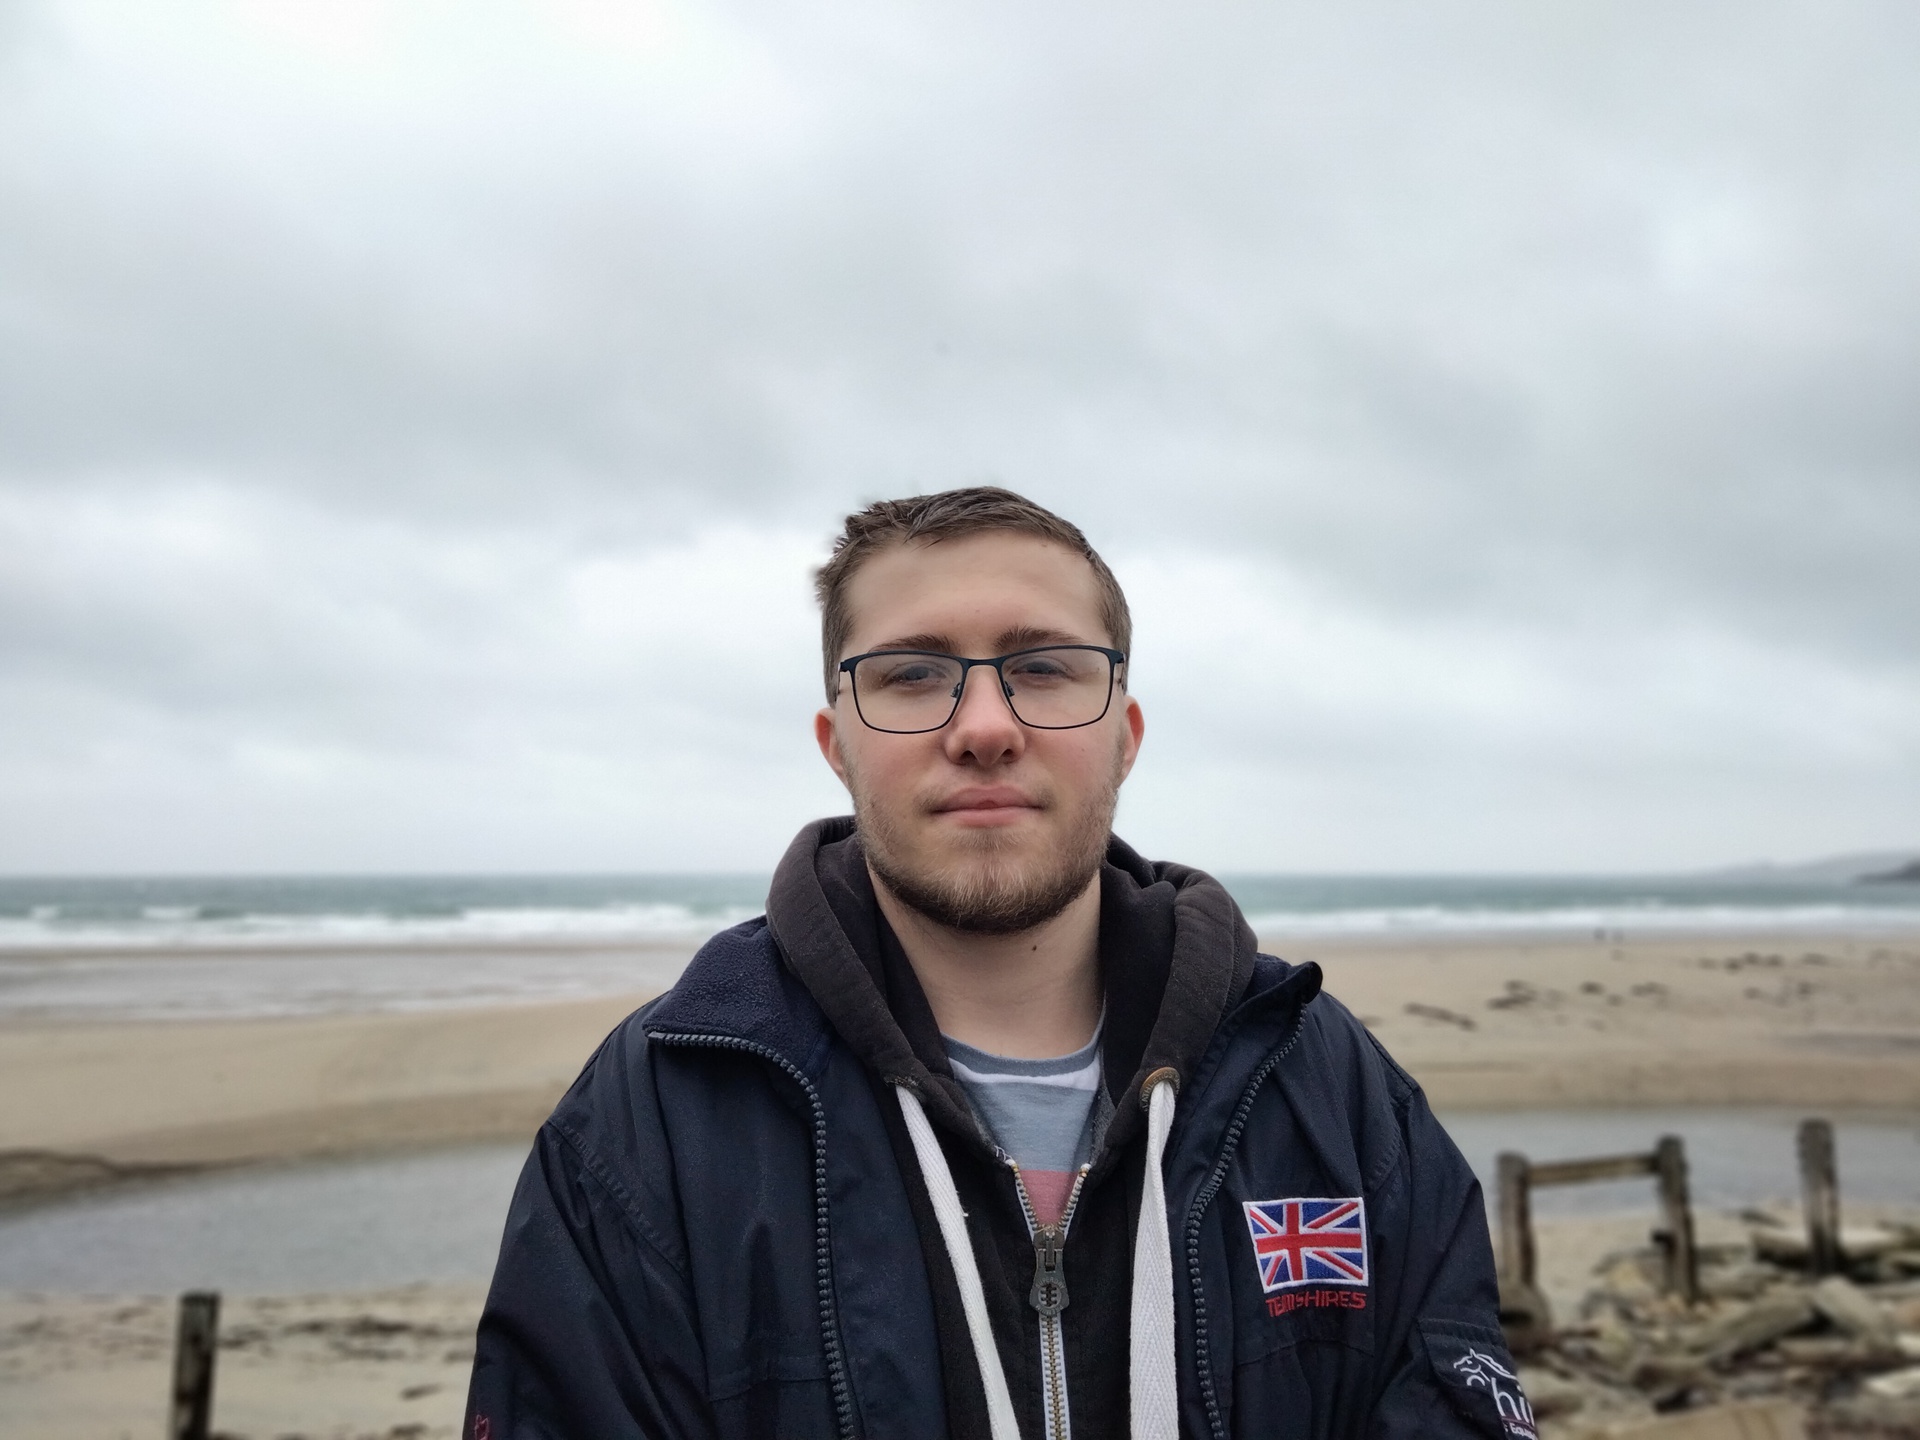 OnePlus Nord N100 portrait photo sample at a beach front